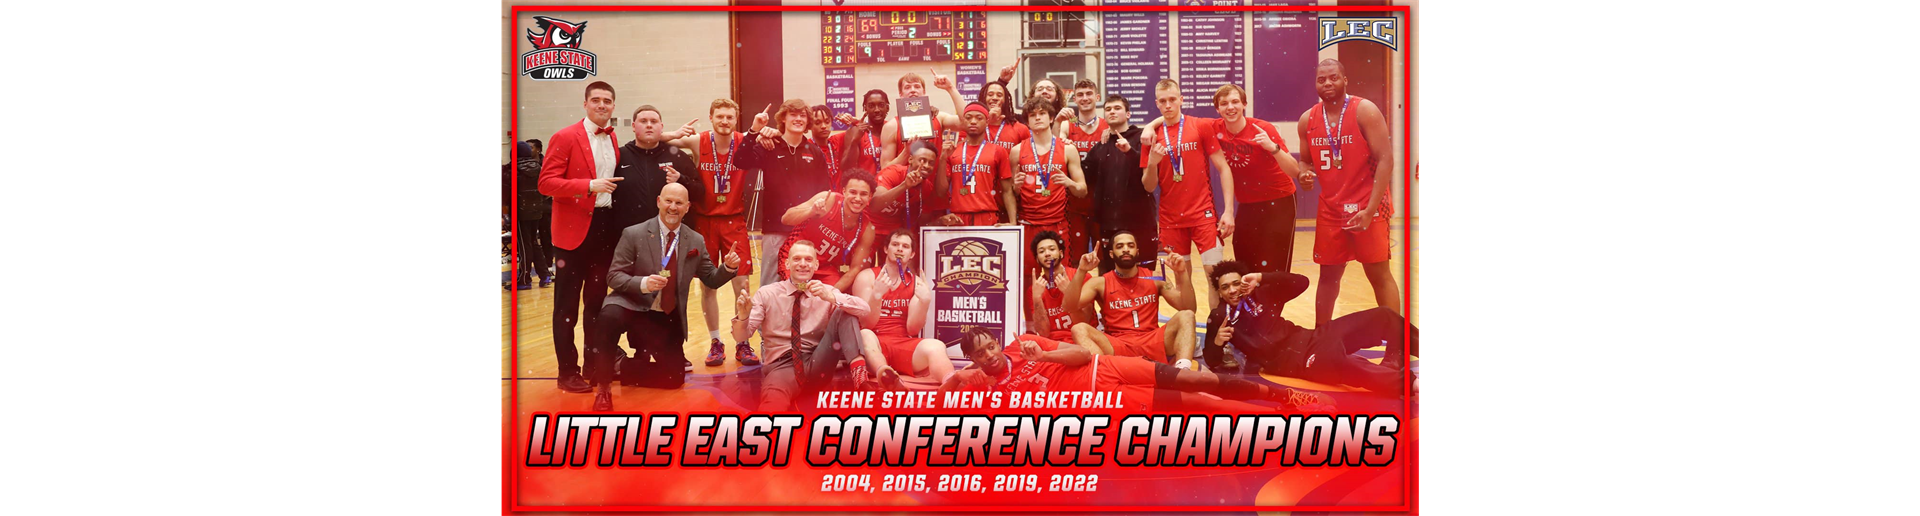 Little East Conference Champions